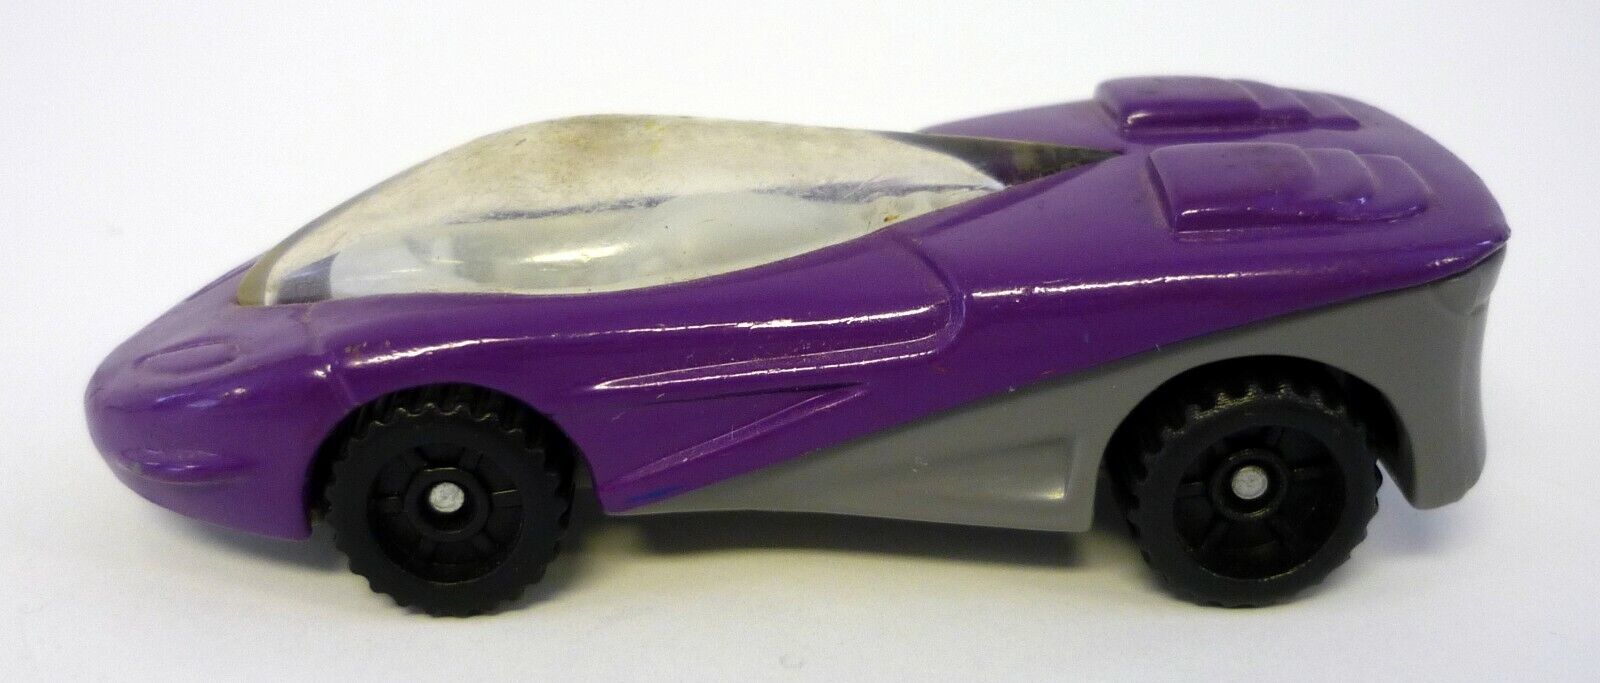 Primary image for Hot Wheels Purple McDonald's Die-Cast Car 1994